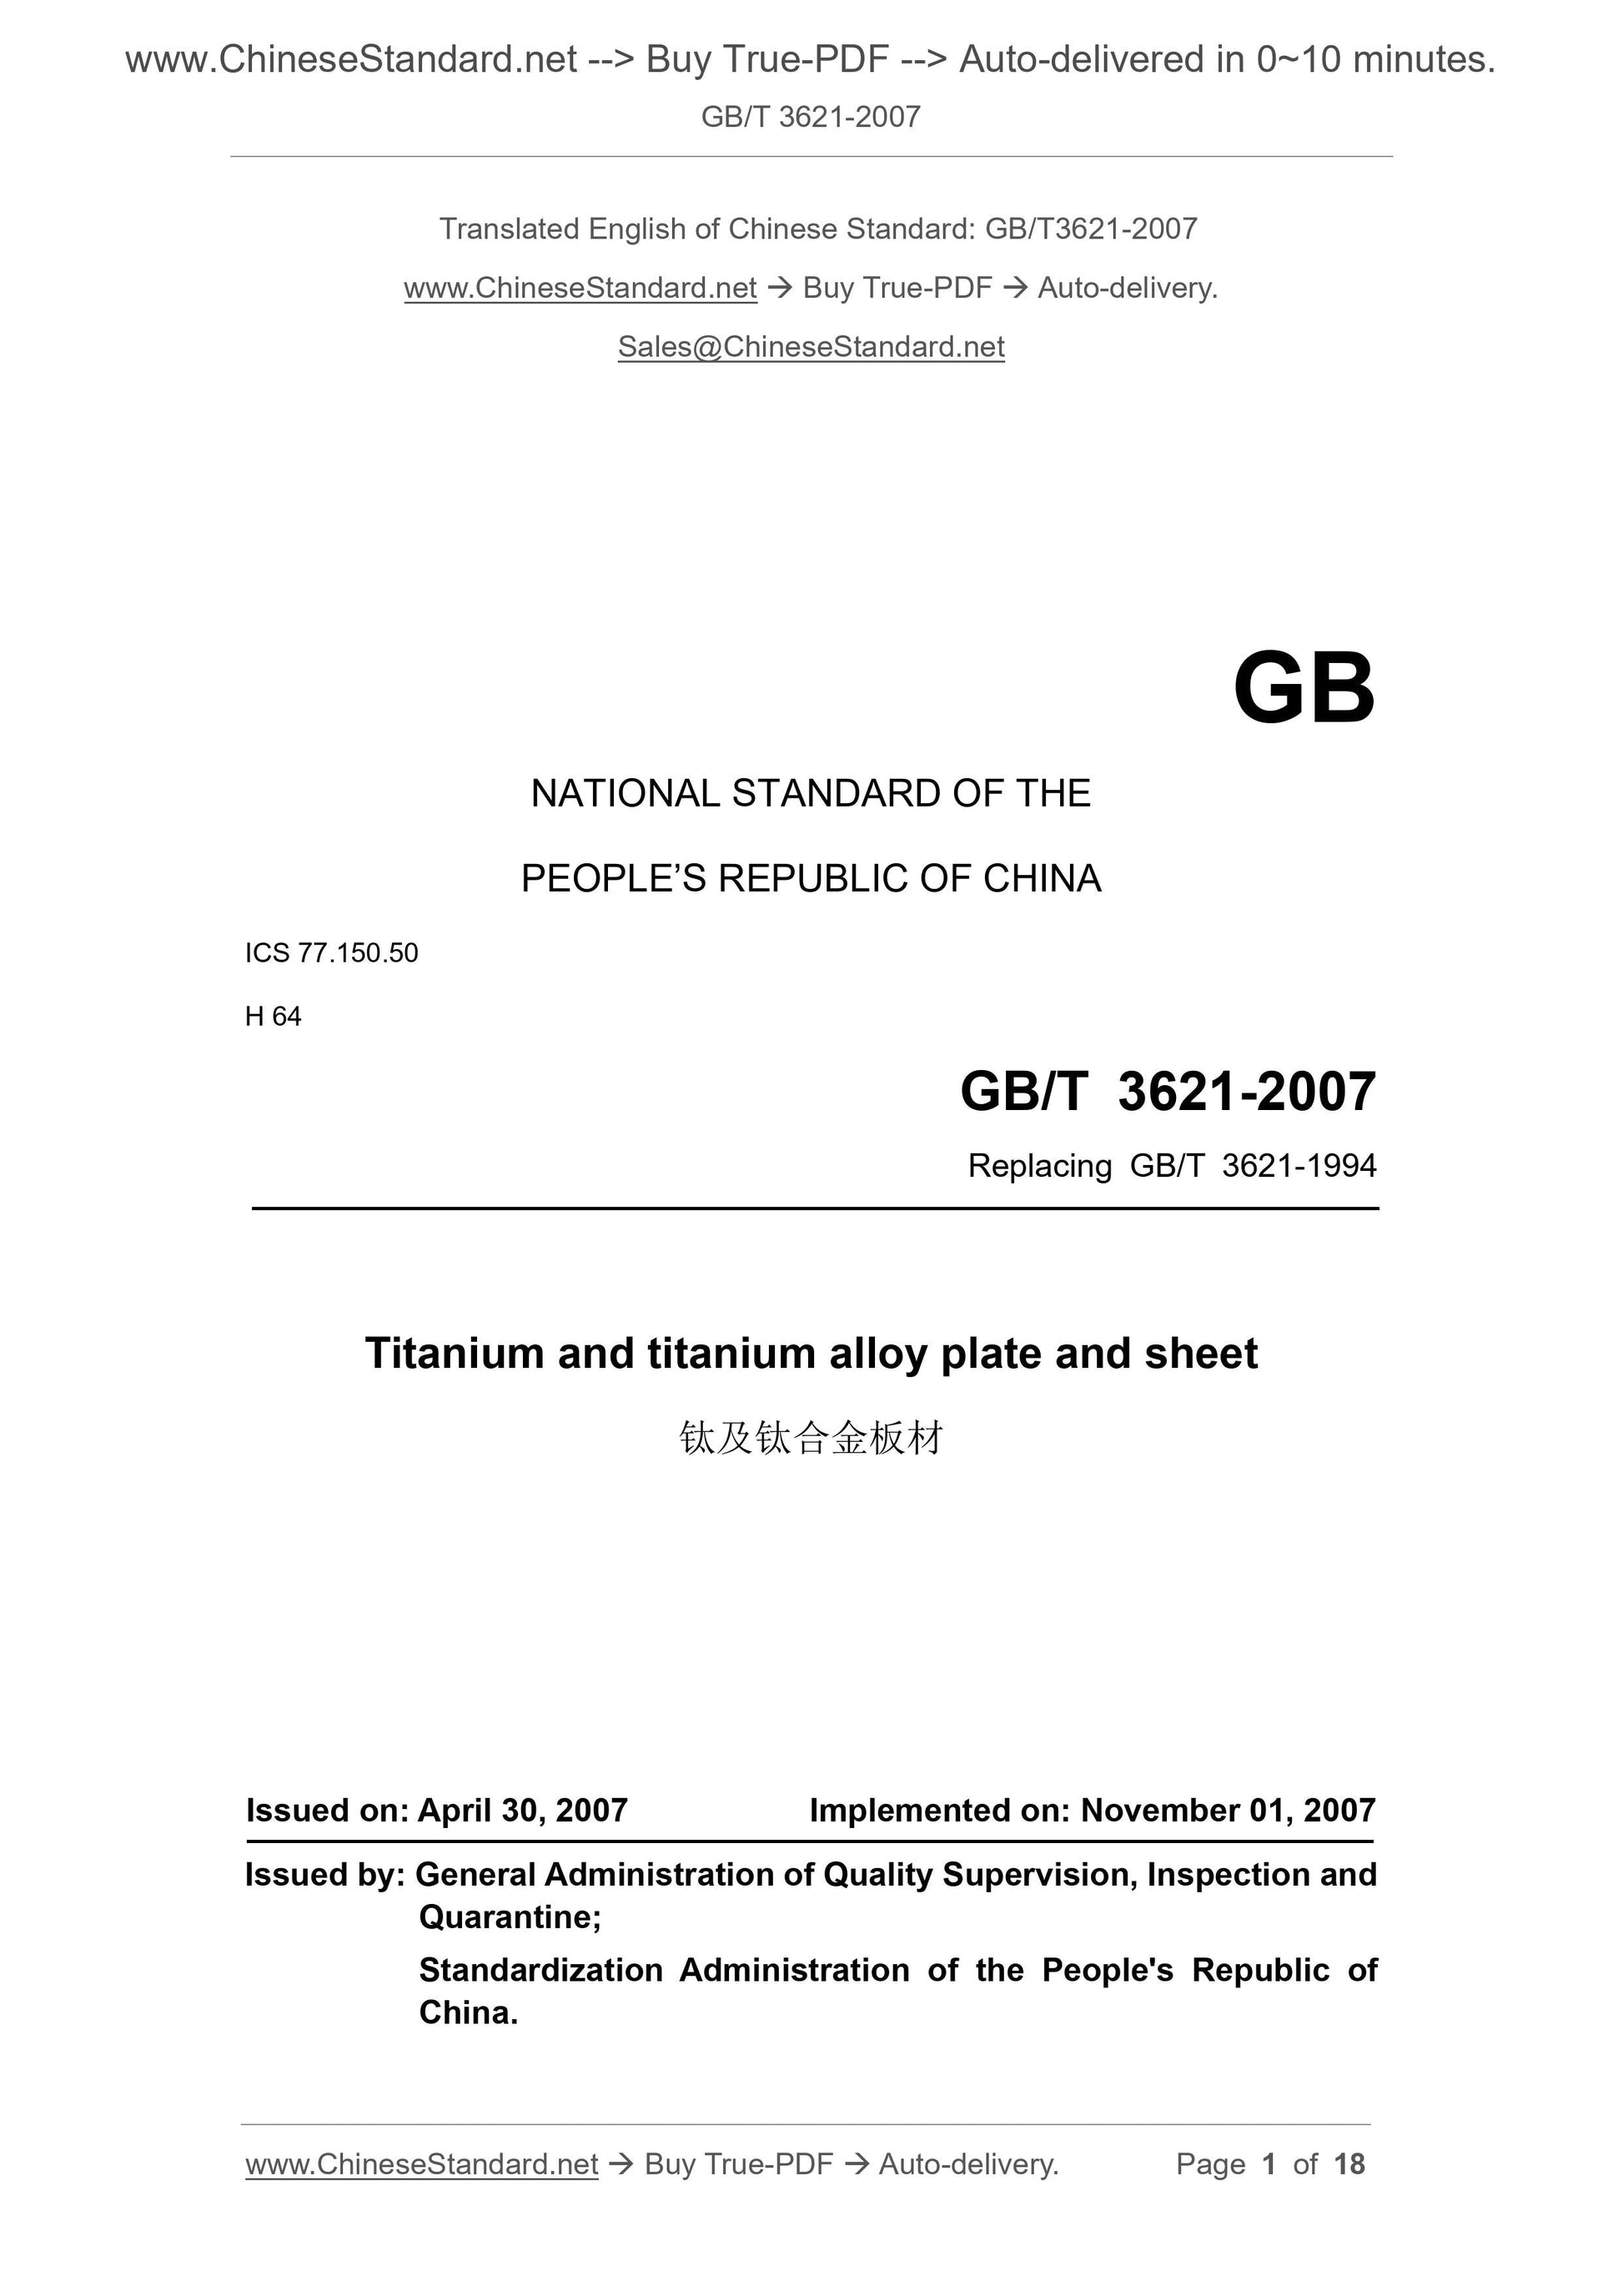 GB/T 3621-2007 Page 1